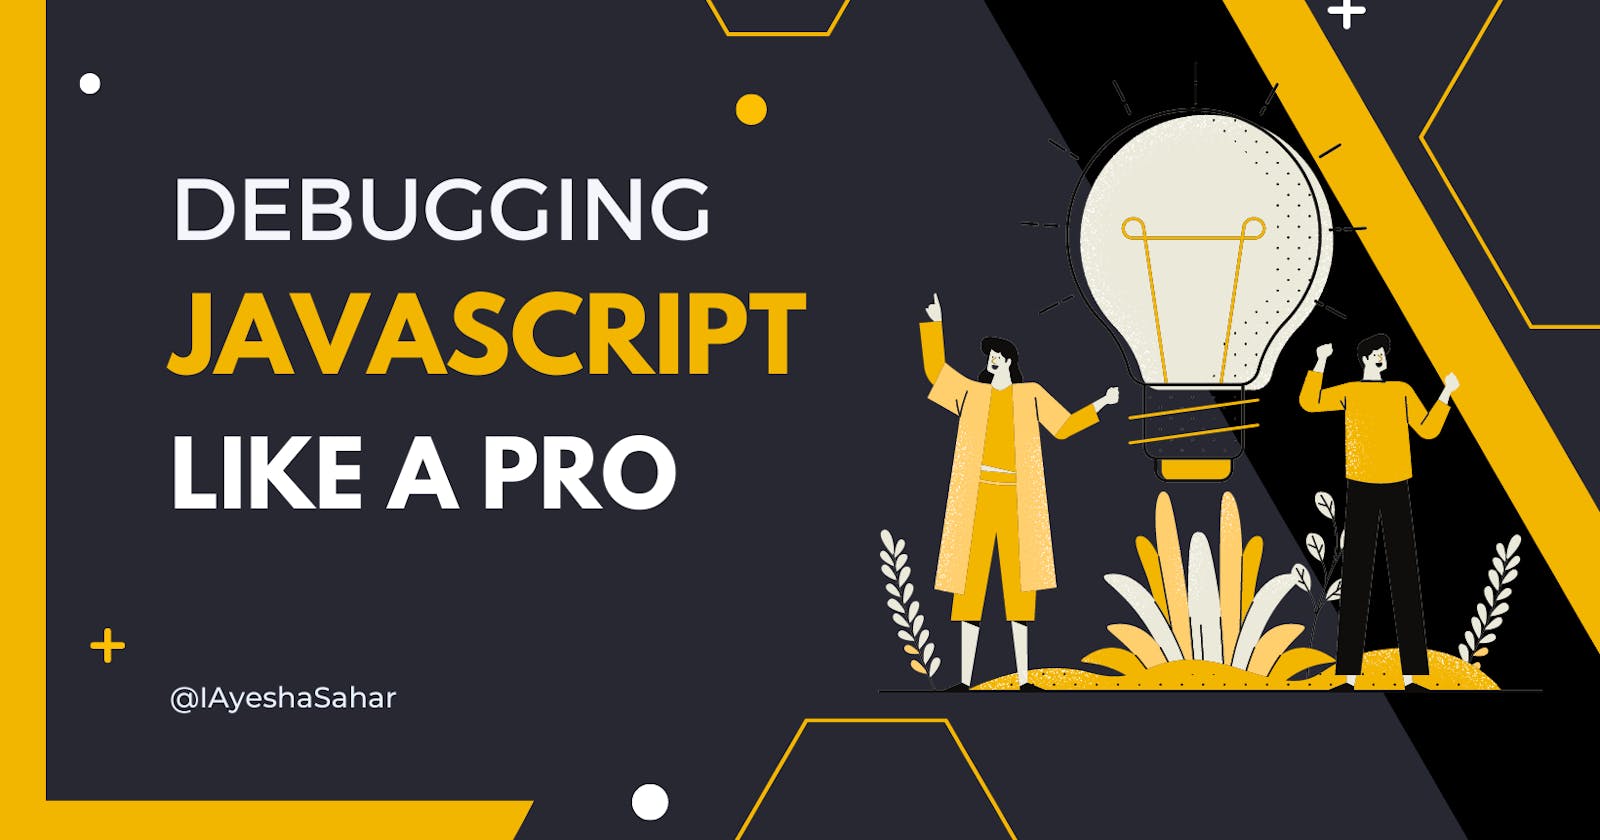 Debugging JavaScript Like a Pro: Tools and Techniques for Finding and Fixing Bugs